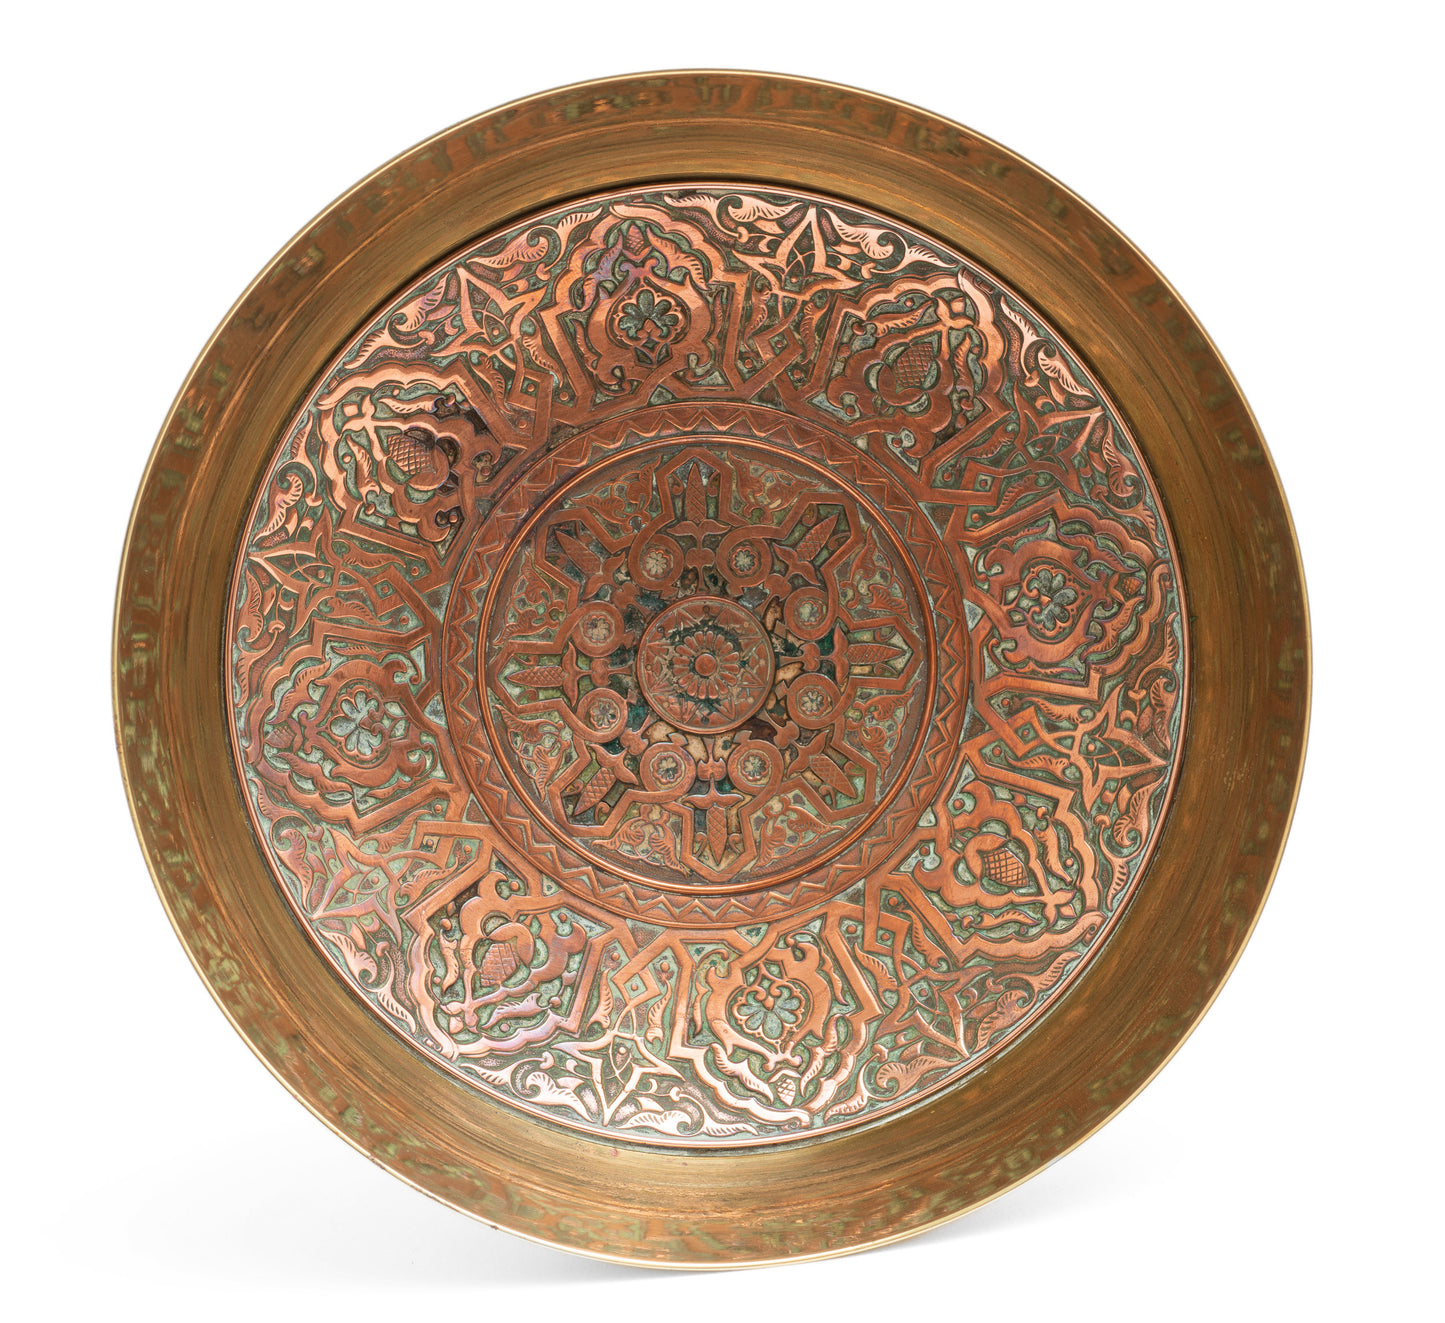 Antique Islamic Middle Eastern Copper & Brass Pedestal Bowl / Comport (Code 2232)